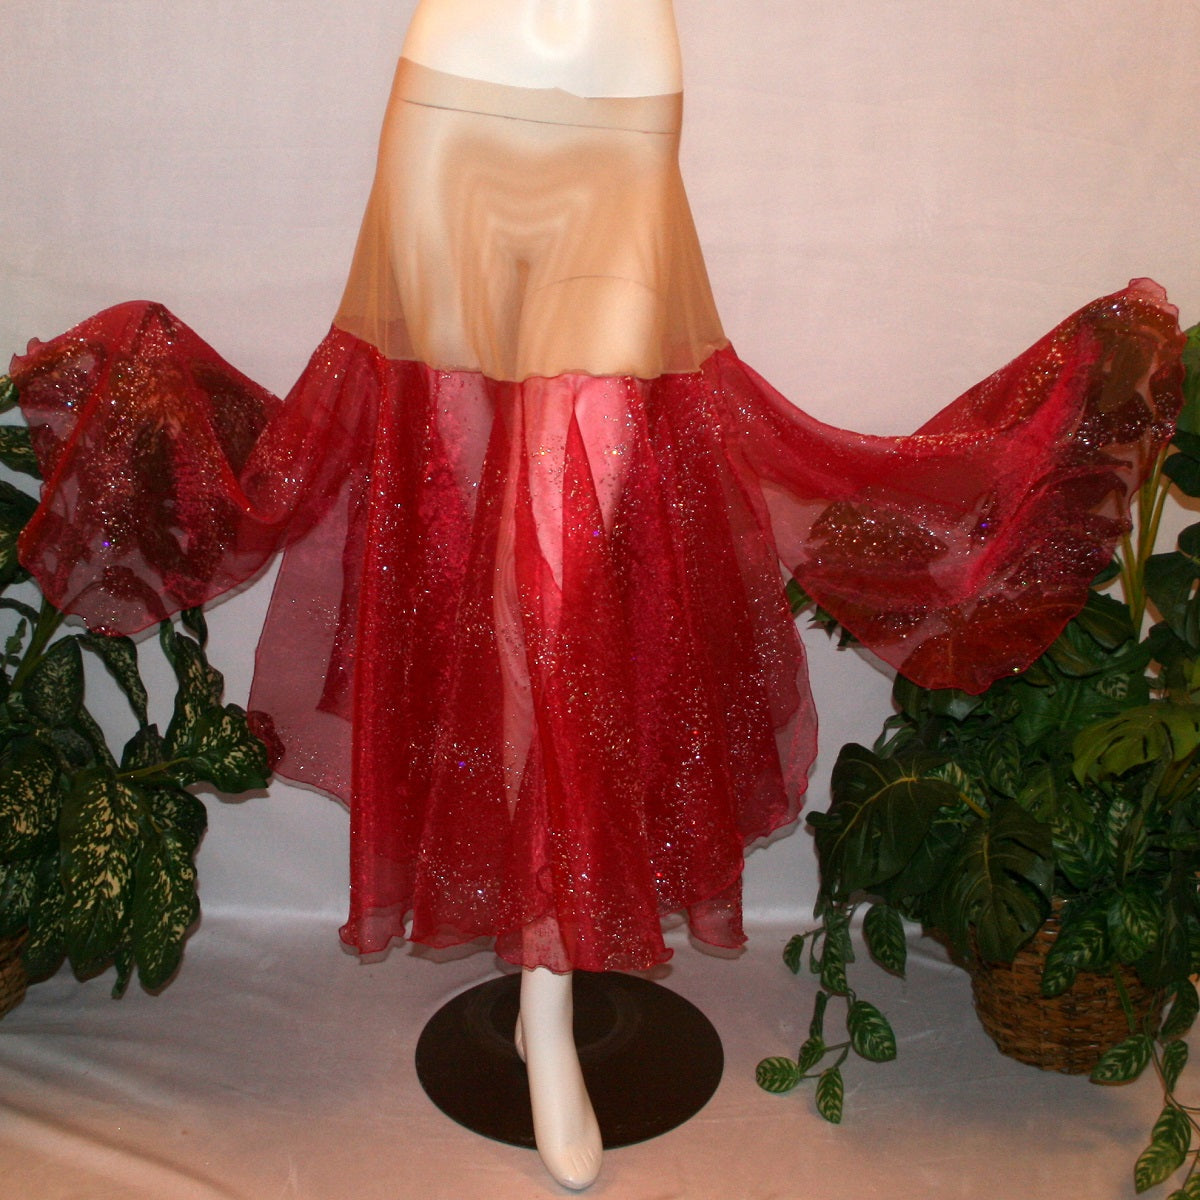 flaired view of Red ballroom skirt created on a nude illusion hip band of yards of scarlette red panels with silver & pearlized flecking, very cool & showy!